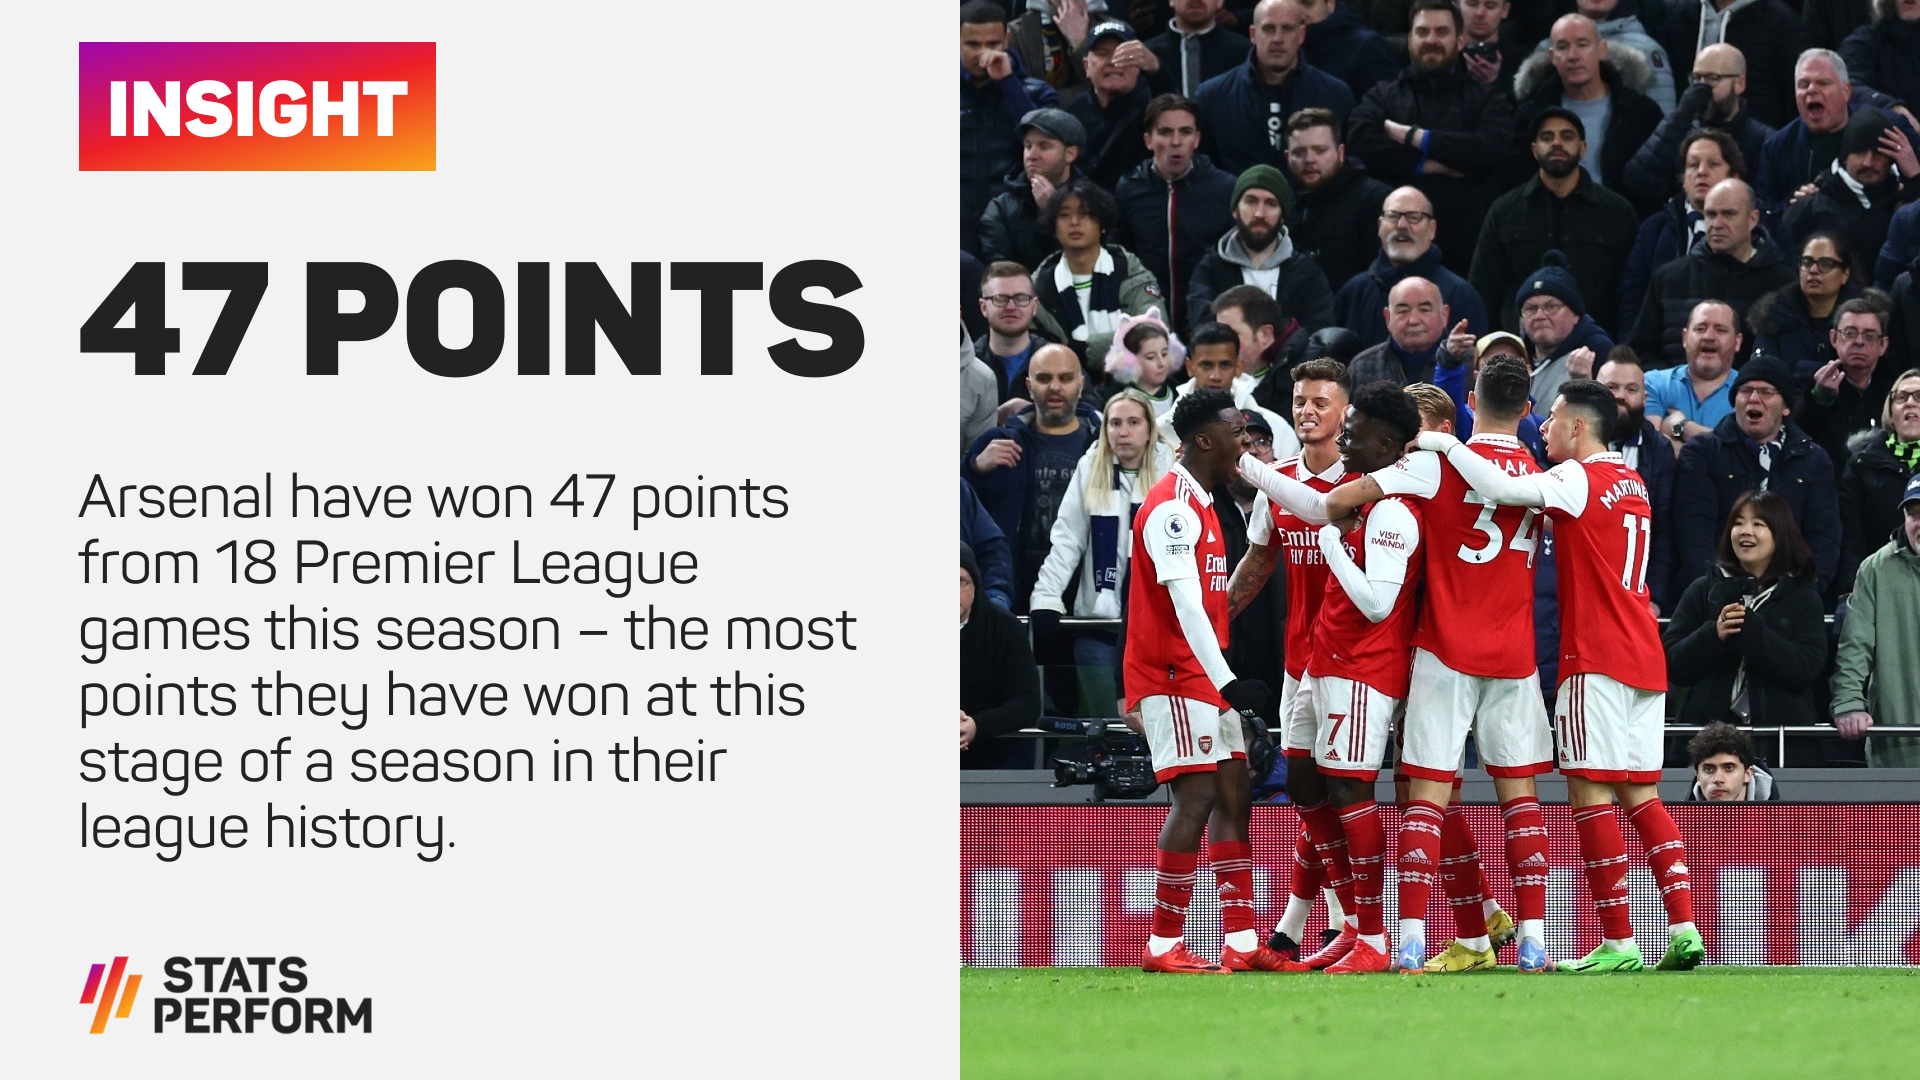 Arsenal have 47 points from 18 matches